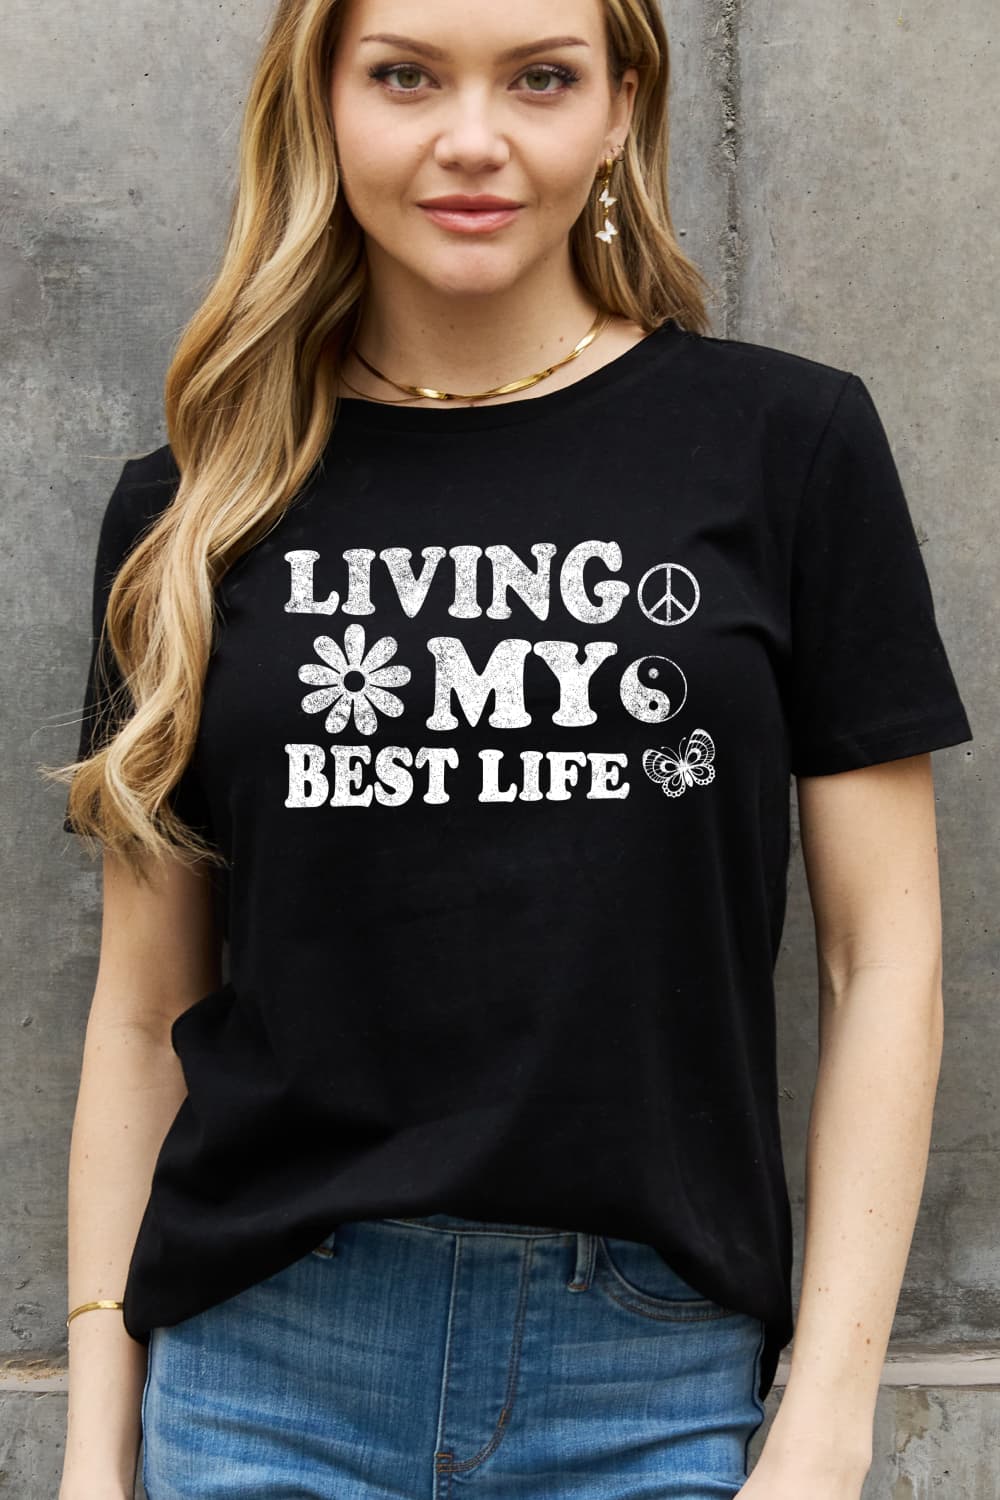 Simply Love Full Size LIVING MY BEST LIFE Graphic Cotton Tee